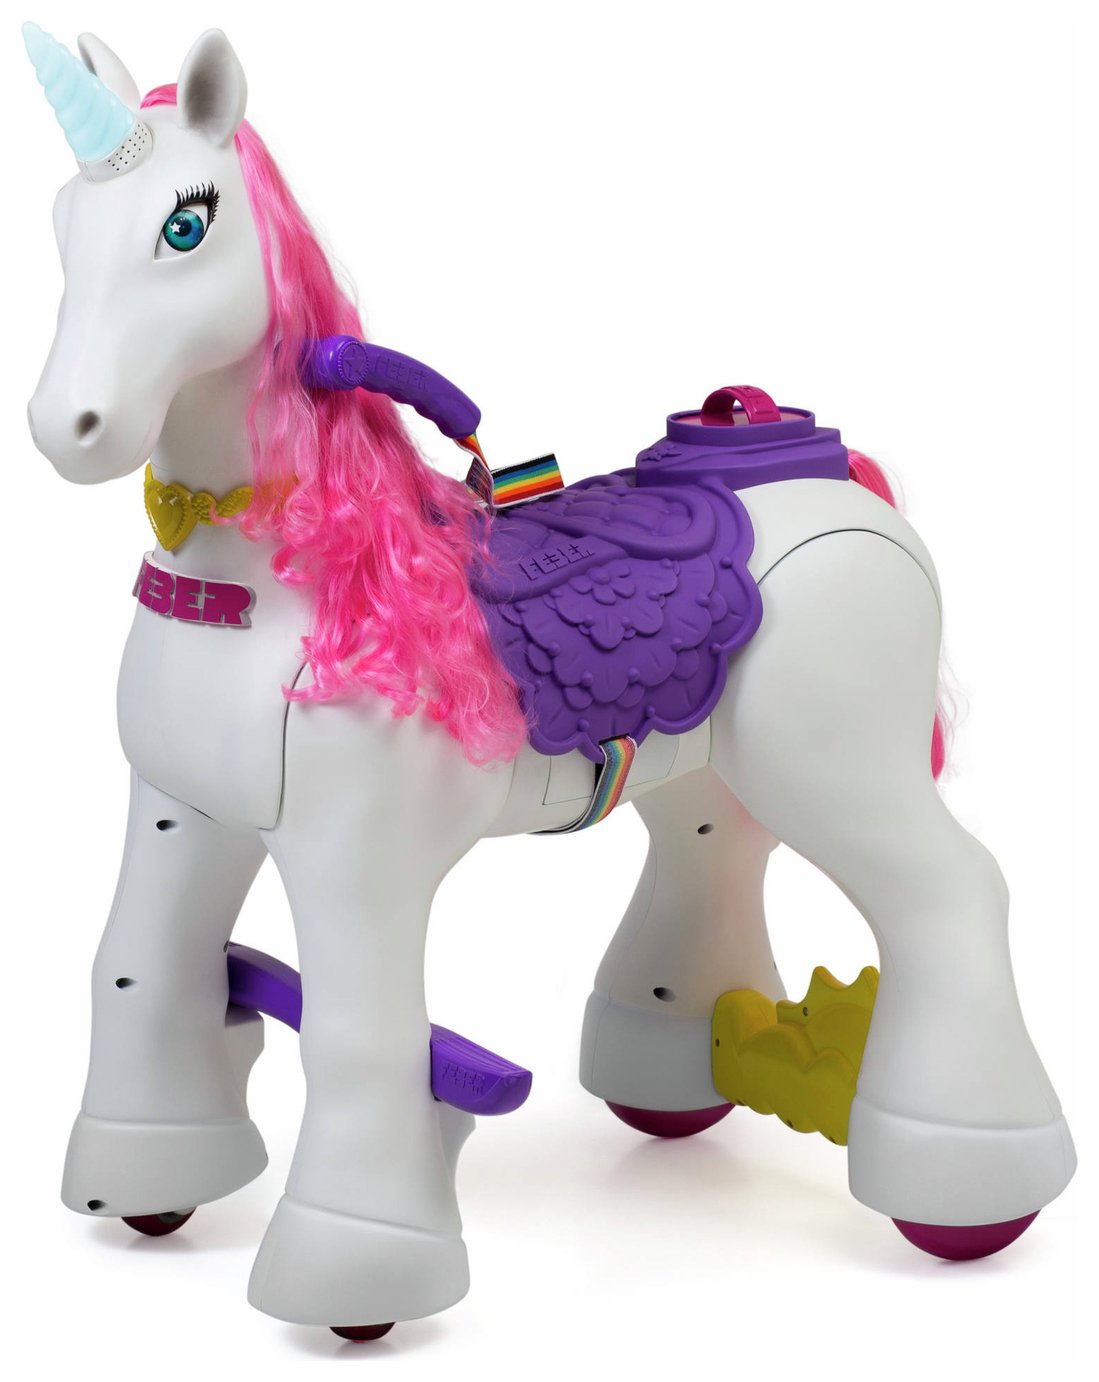 riding toy unicorn with purple horn